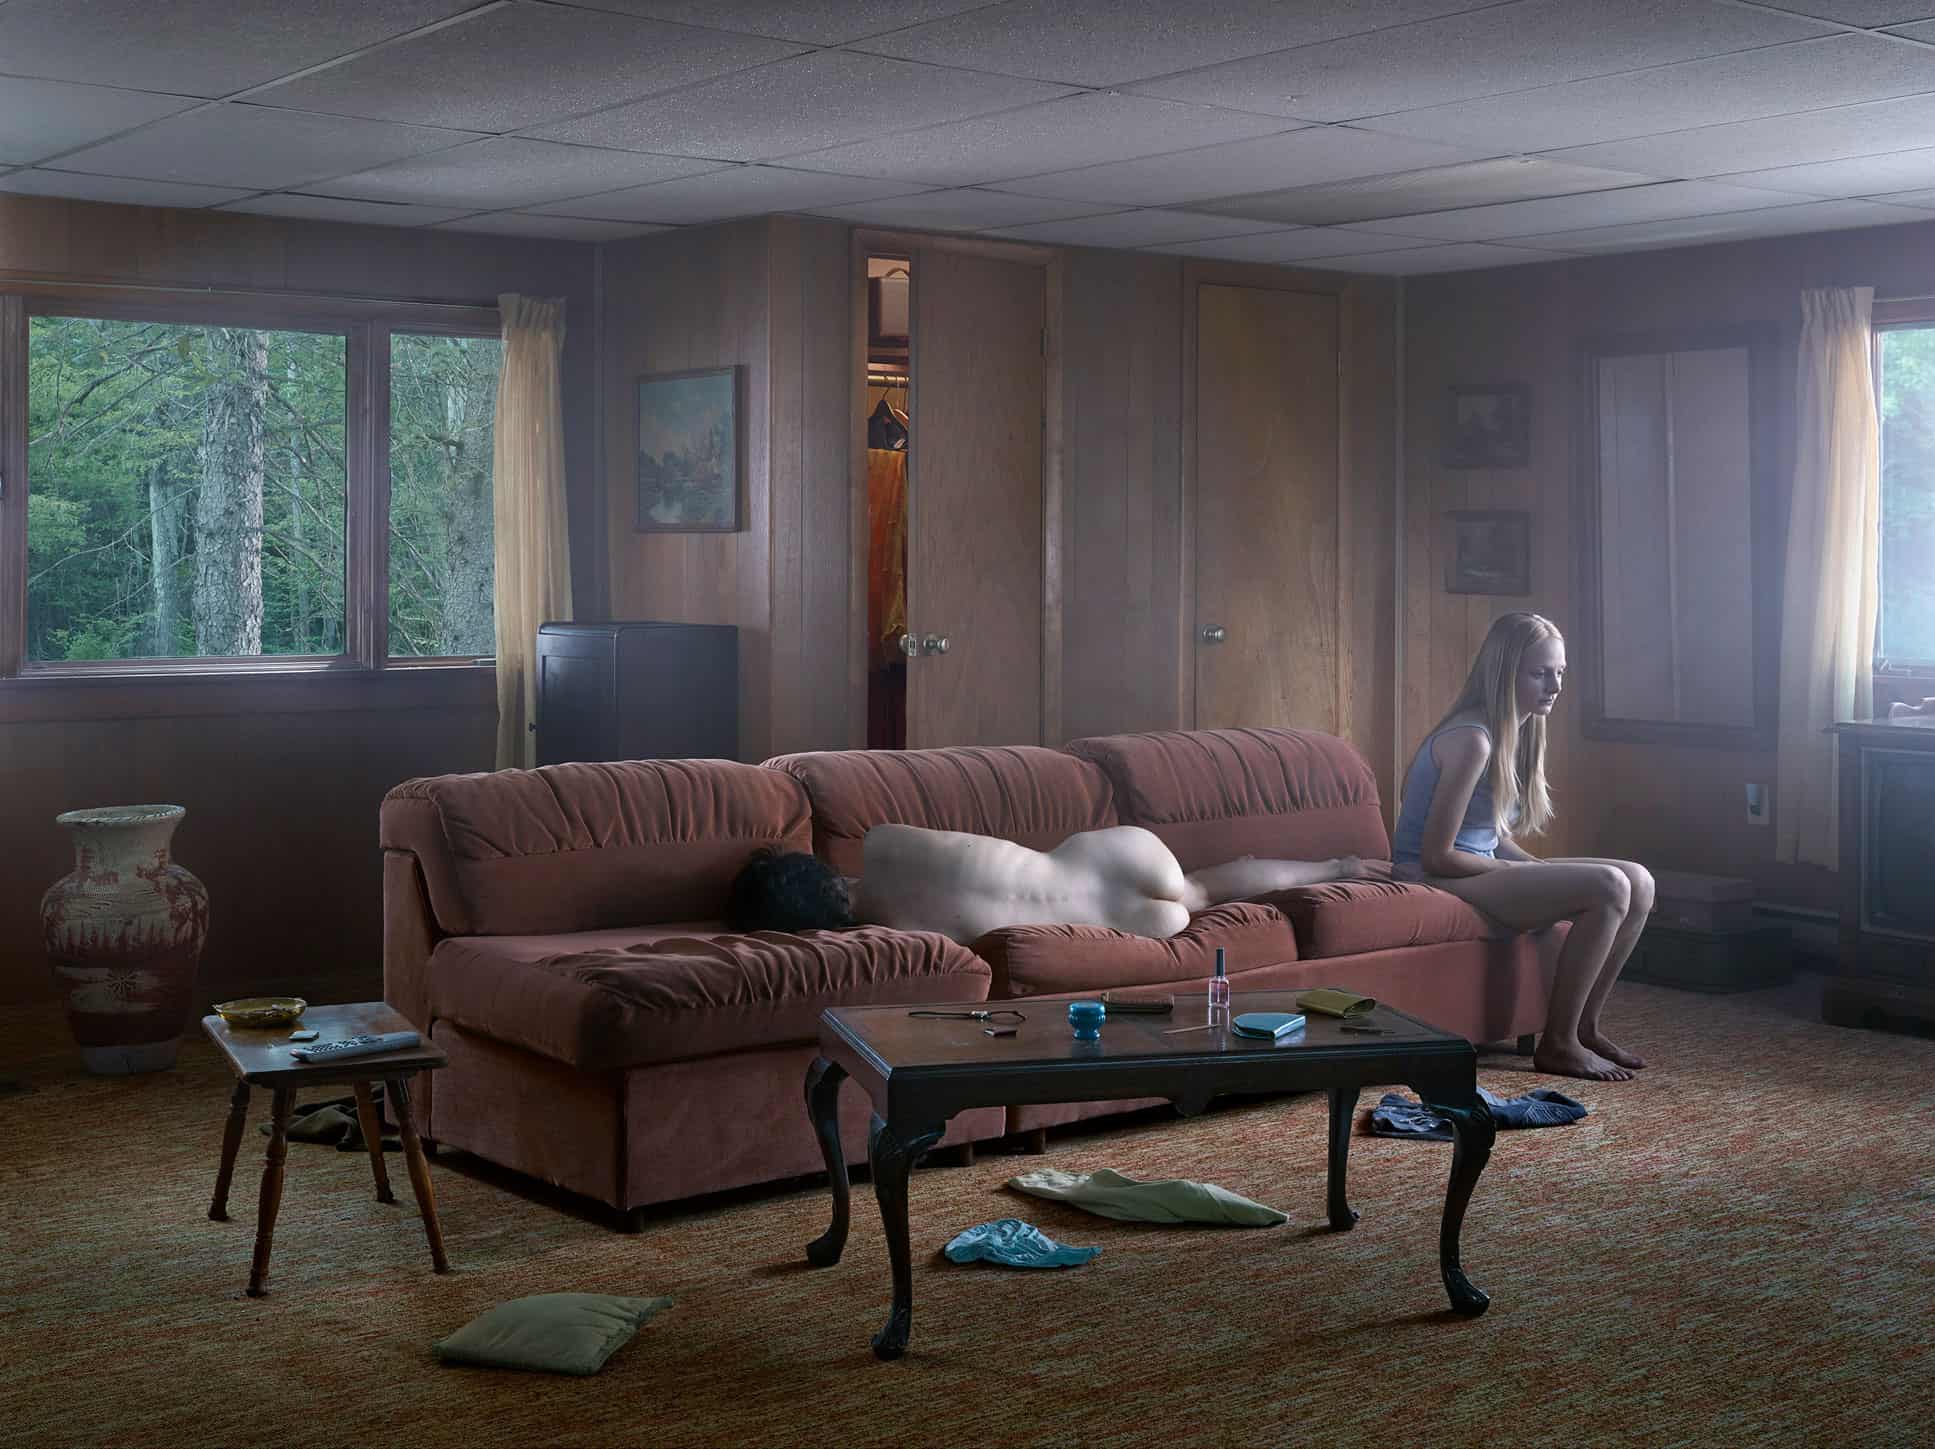 Interview 039: Gregory Crewdson | The Photographic Journal